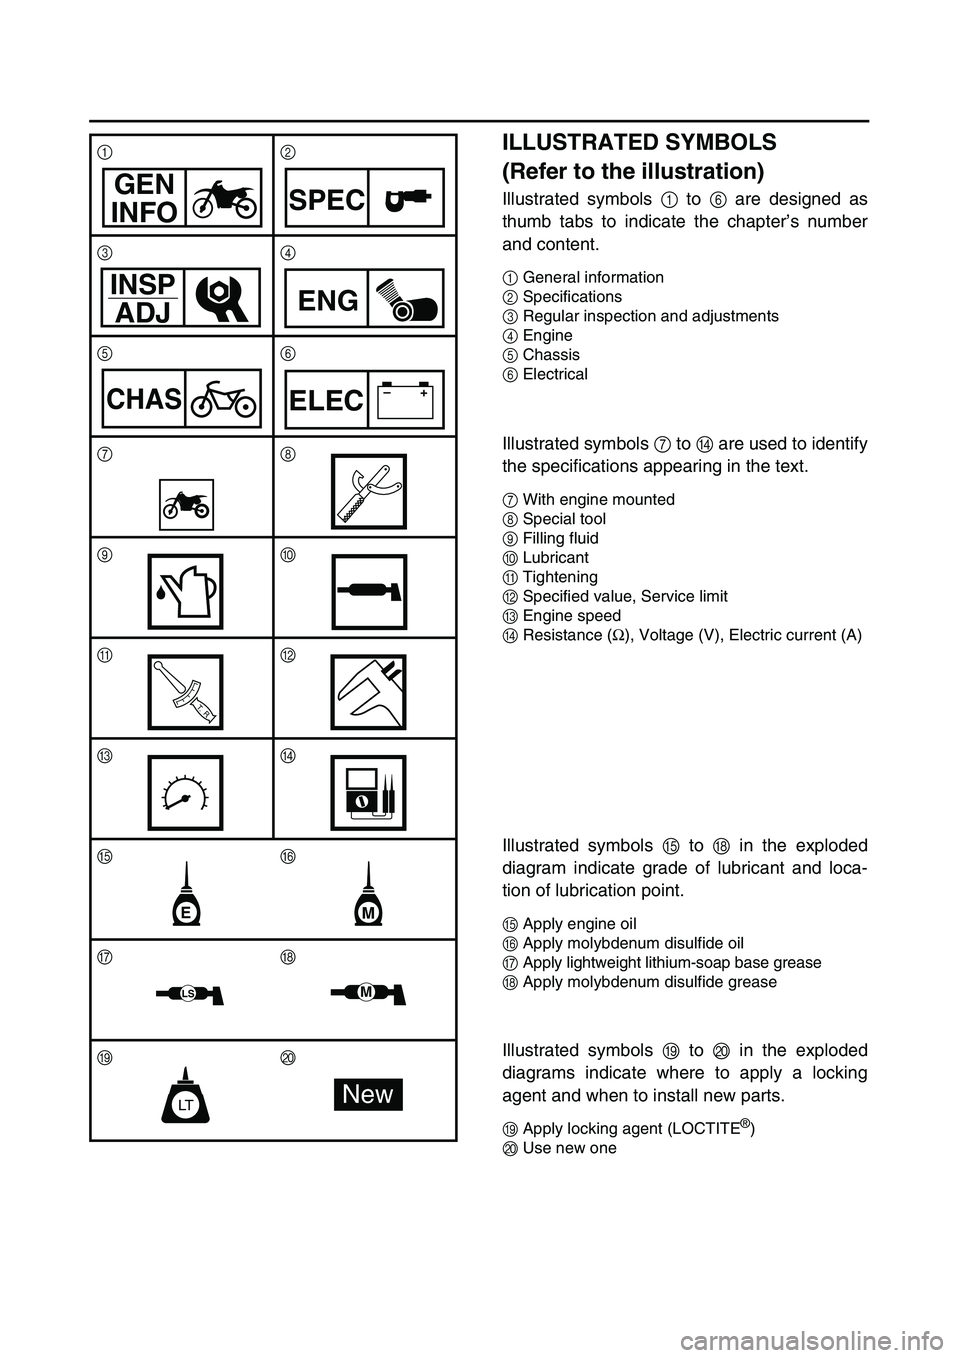 YAMAHA TTR90 2004  Betriebsanleitungen (in German)  
ILLUSTRATED SYMBOLS 
(Refer to the illustration) 
Illustrated symbols  
1  
 to   
6  
 are designed as
thumb tabs to indicate the chapter’s number
and content. 
1 
General information 
2 
Specifi